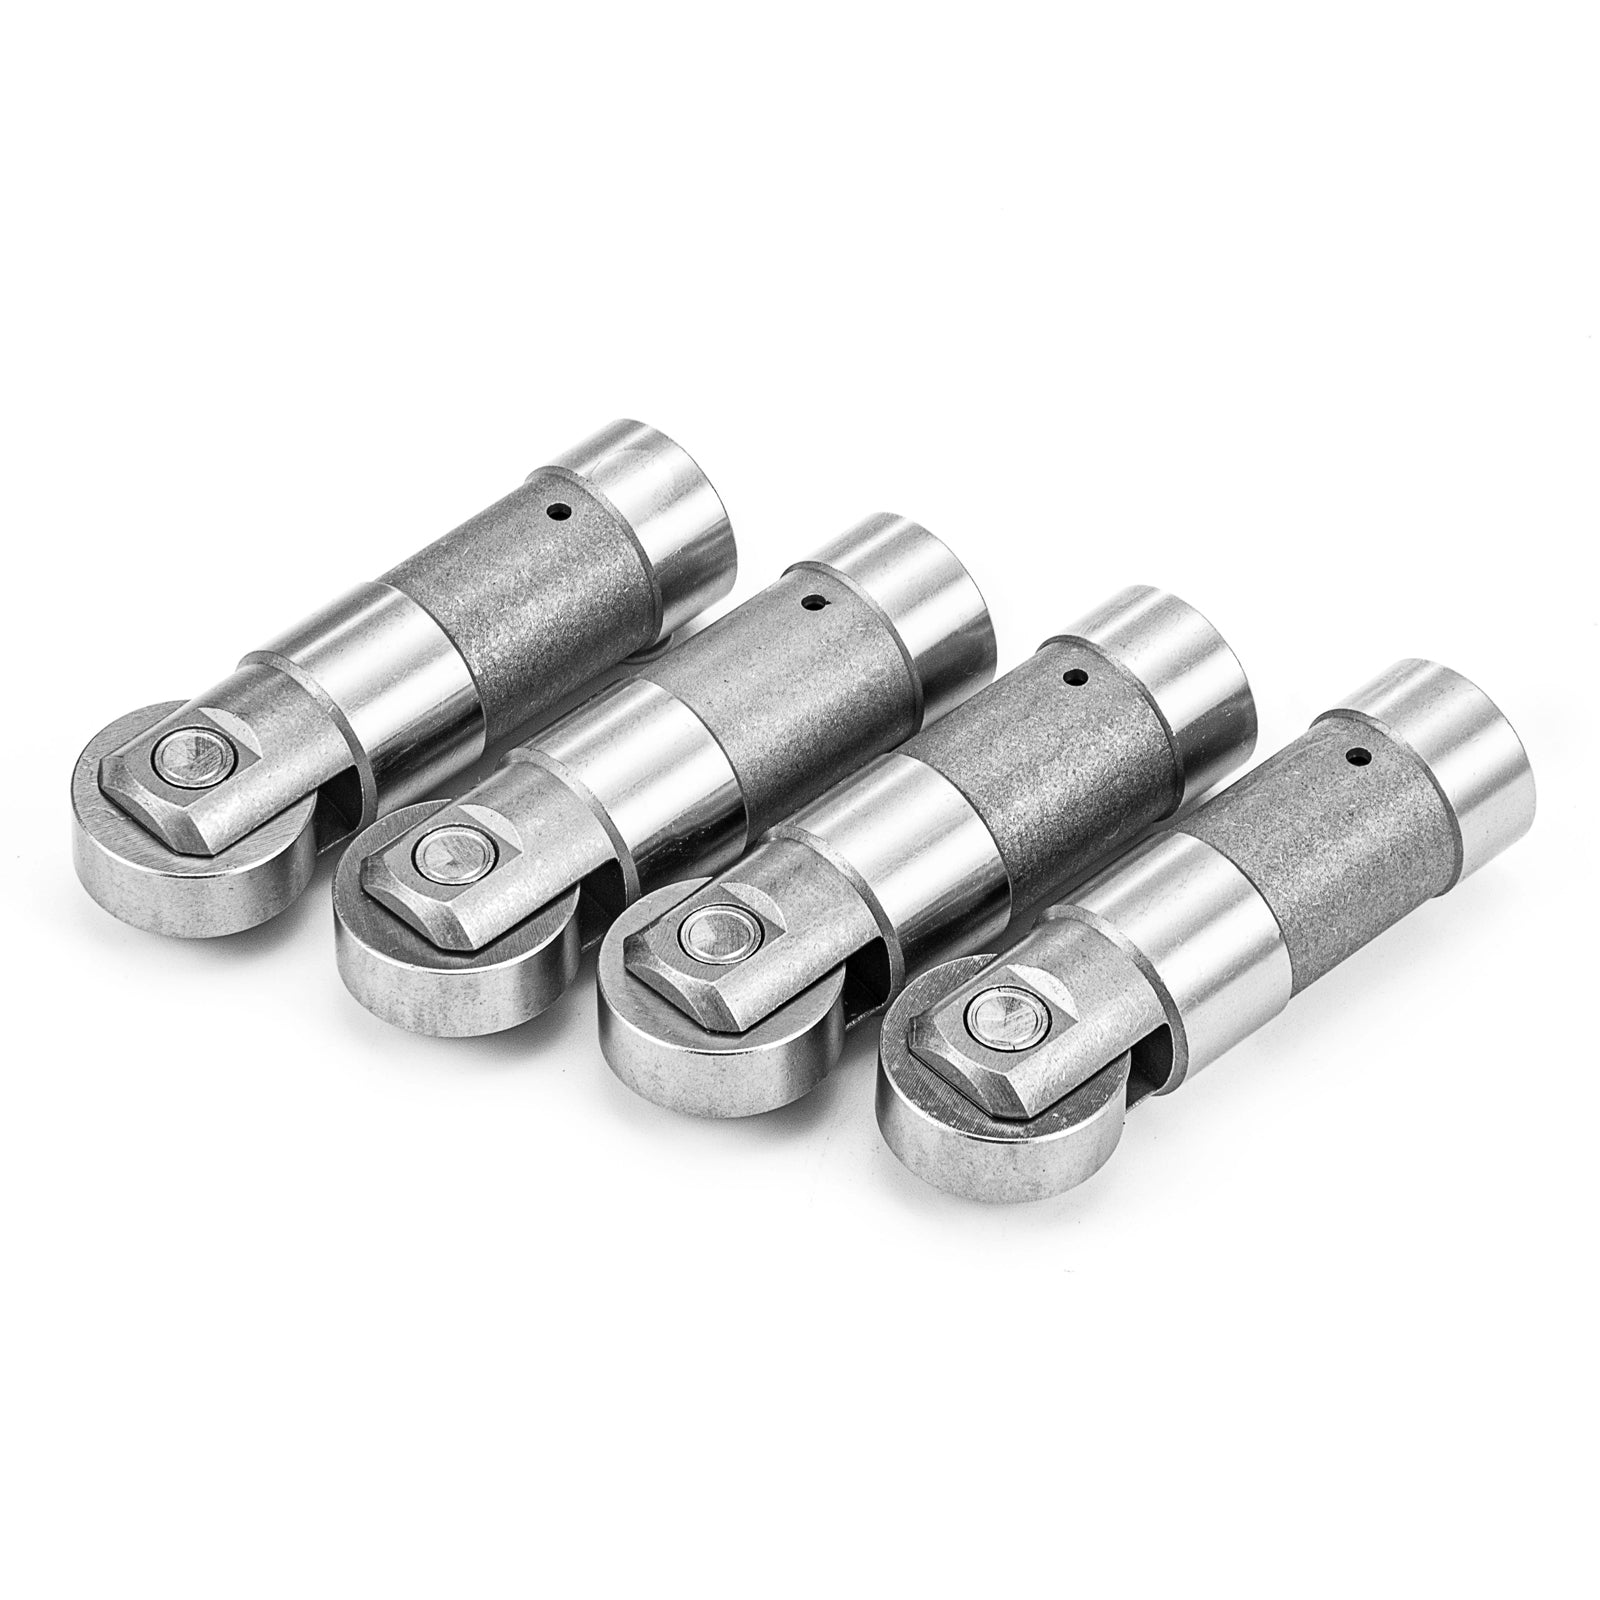 4X Roller Lifter Tappet Hydraulic 20Cr Steel For Harley EVO 1340cc Engine 84-99-2